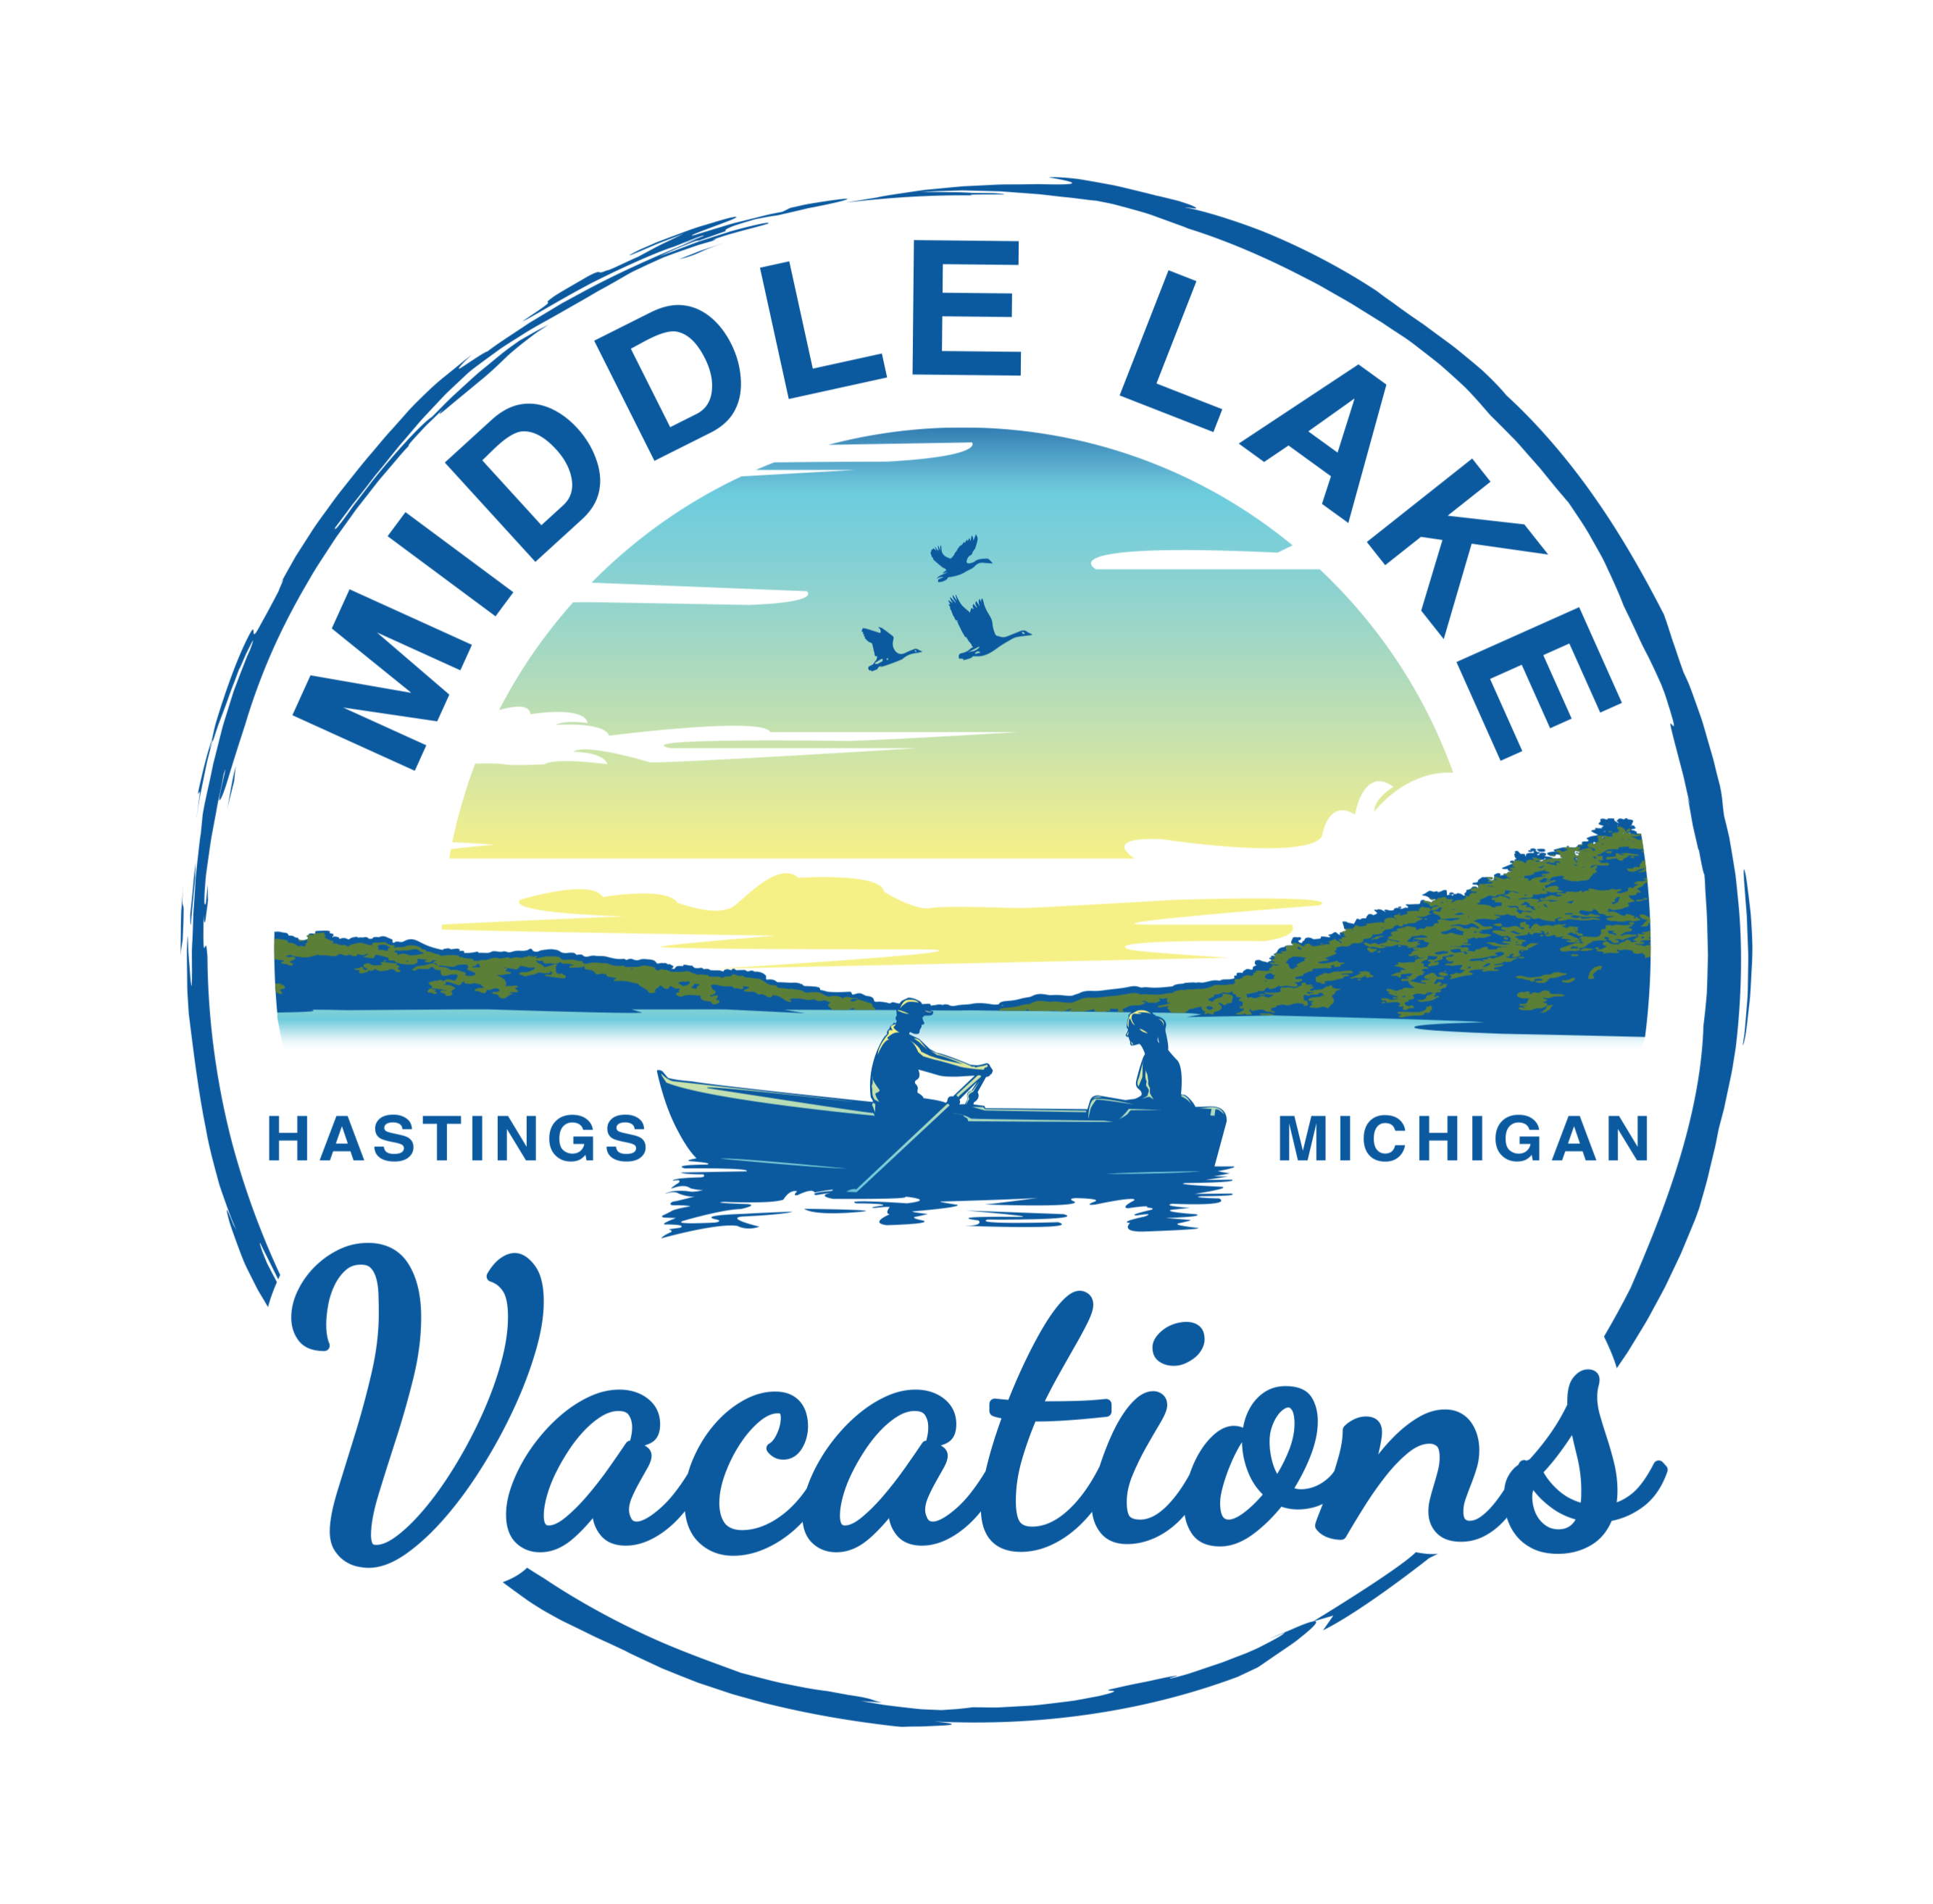 Middle Lake Vacations